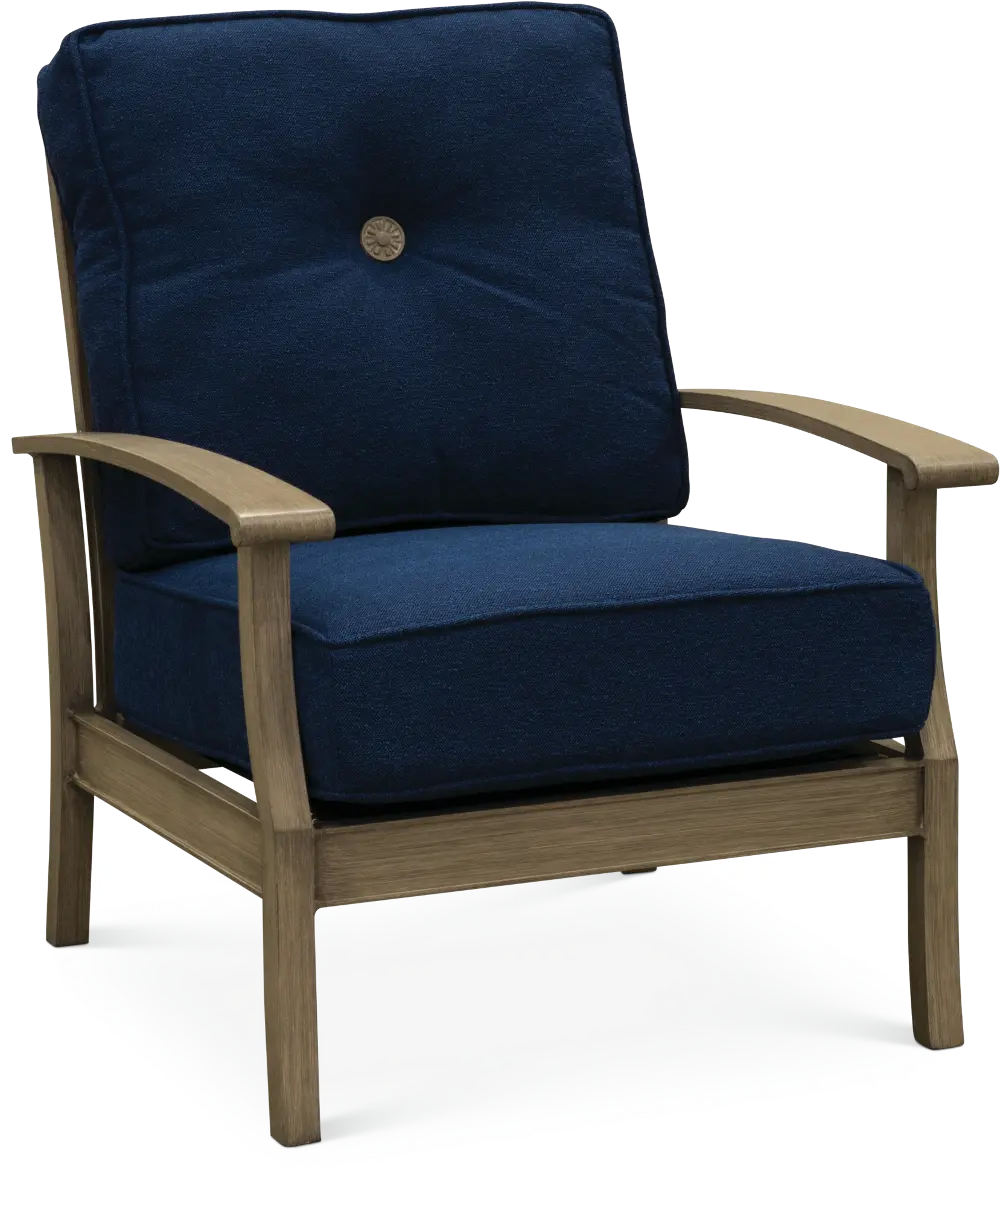 Navy Outdoor Patio Chair - Plank-1